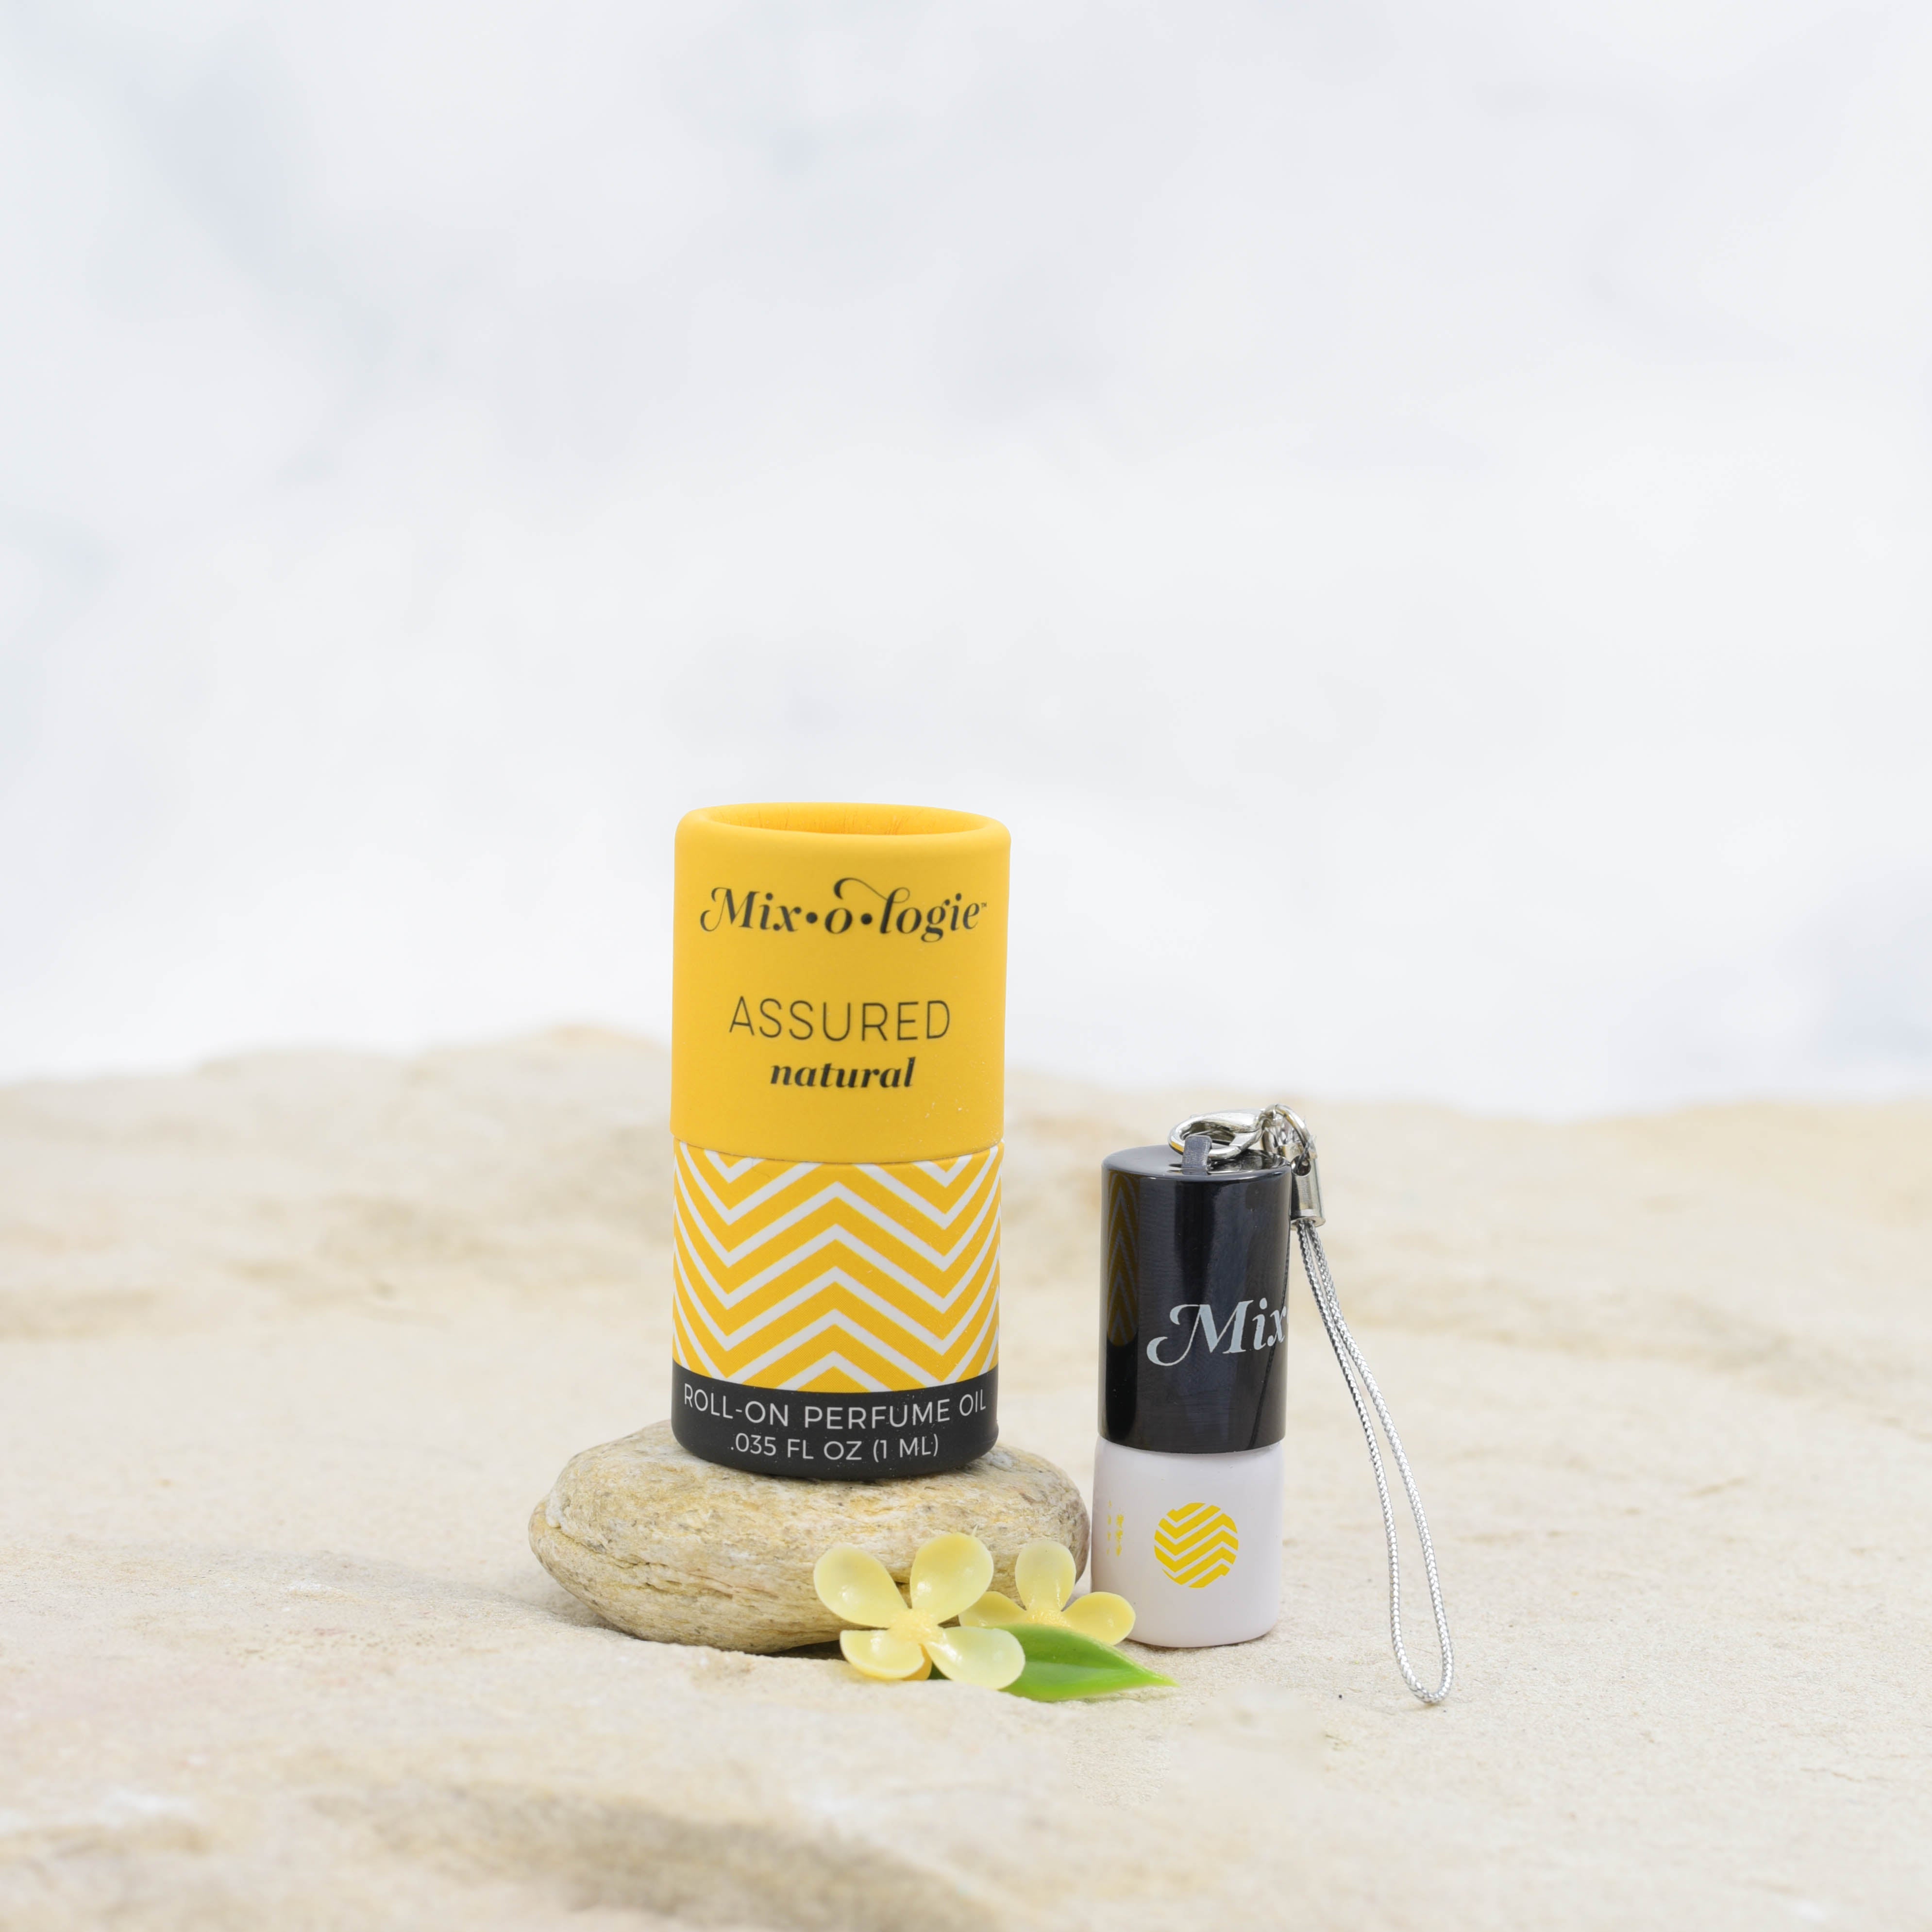 Assured (Natural) mini white cylinder rollerballs with black top and keychain attachment with mustard chevron pattern has .035 fl oz or 1 mL. Mustard cylinder packing tube with mustard chevron pattern. Roll-on perfume oil. Mini rollerball and cylinder tube are in sand on a rock with yellow flowers.